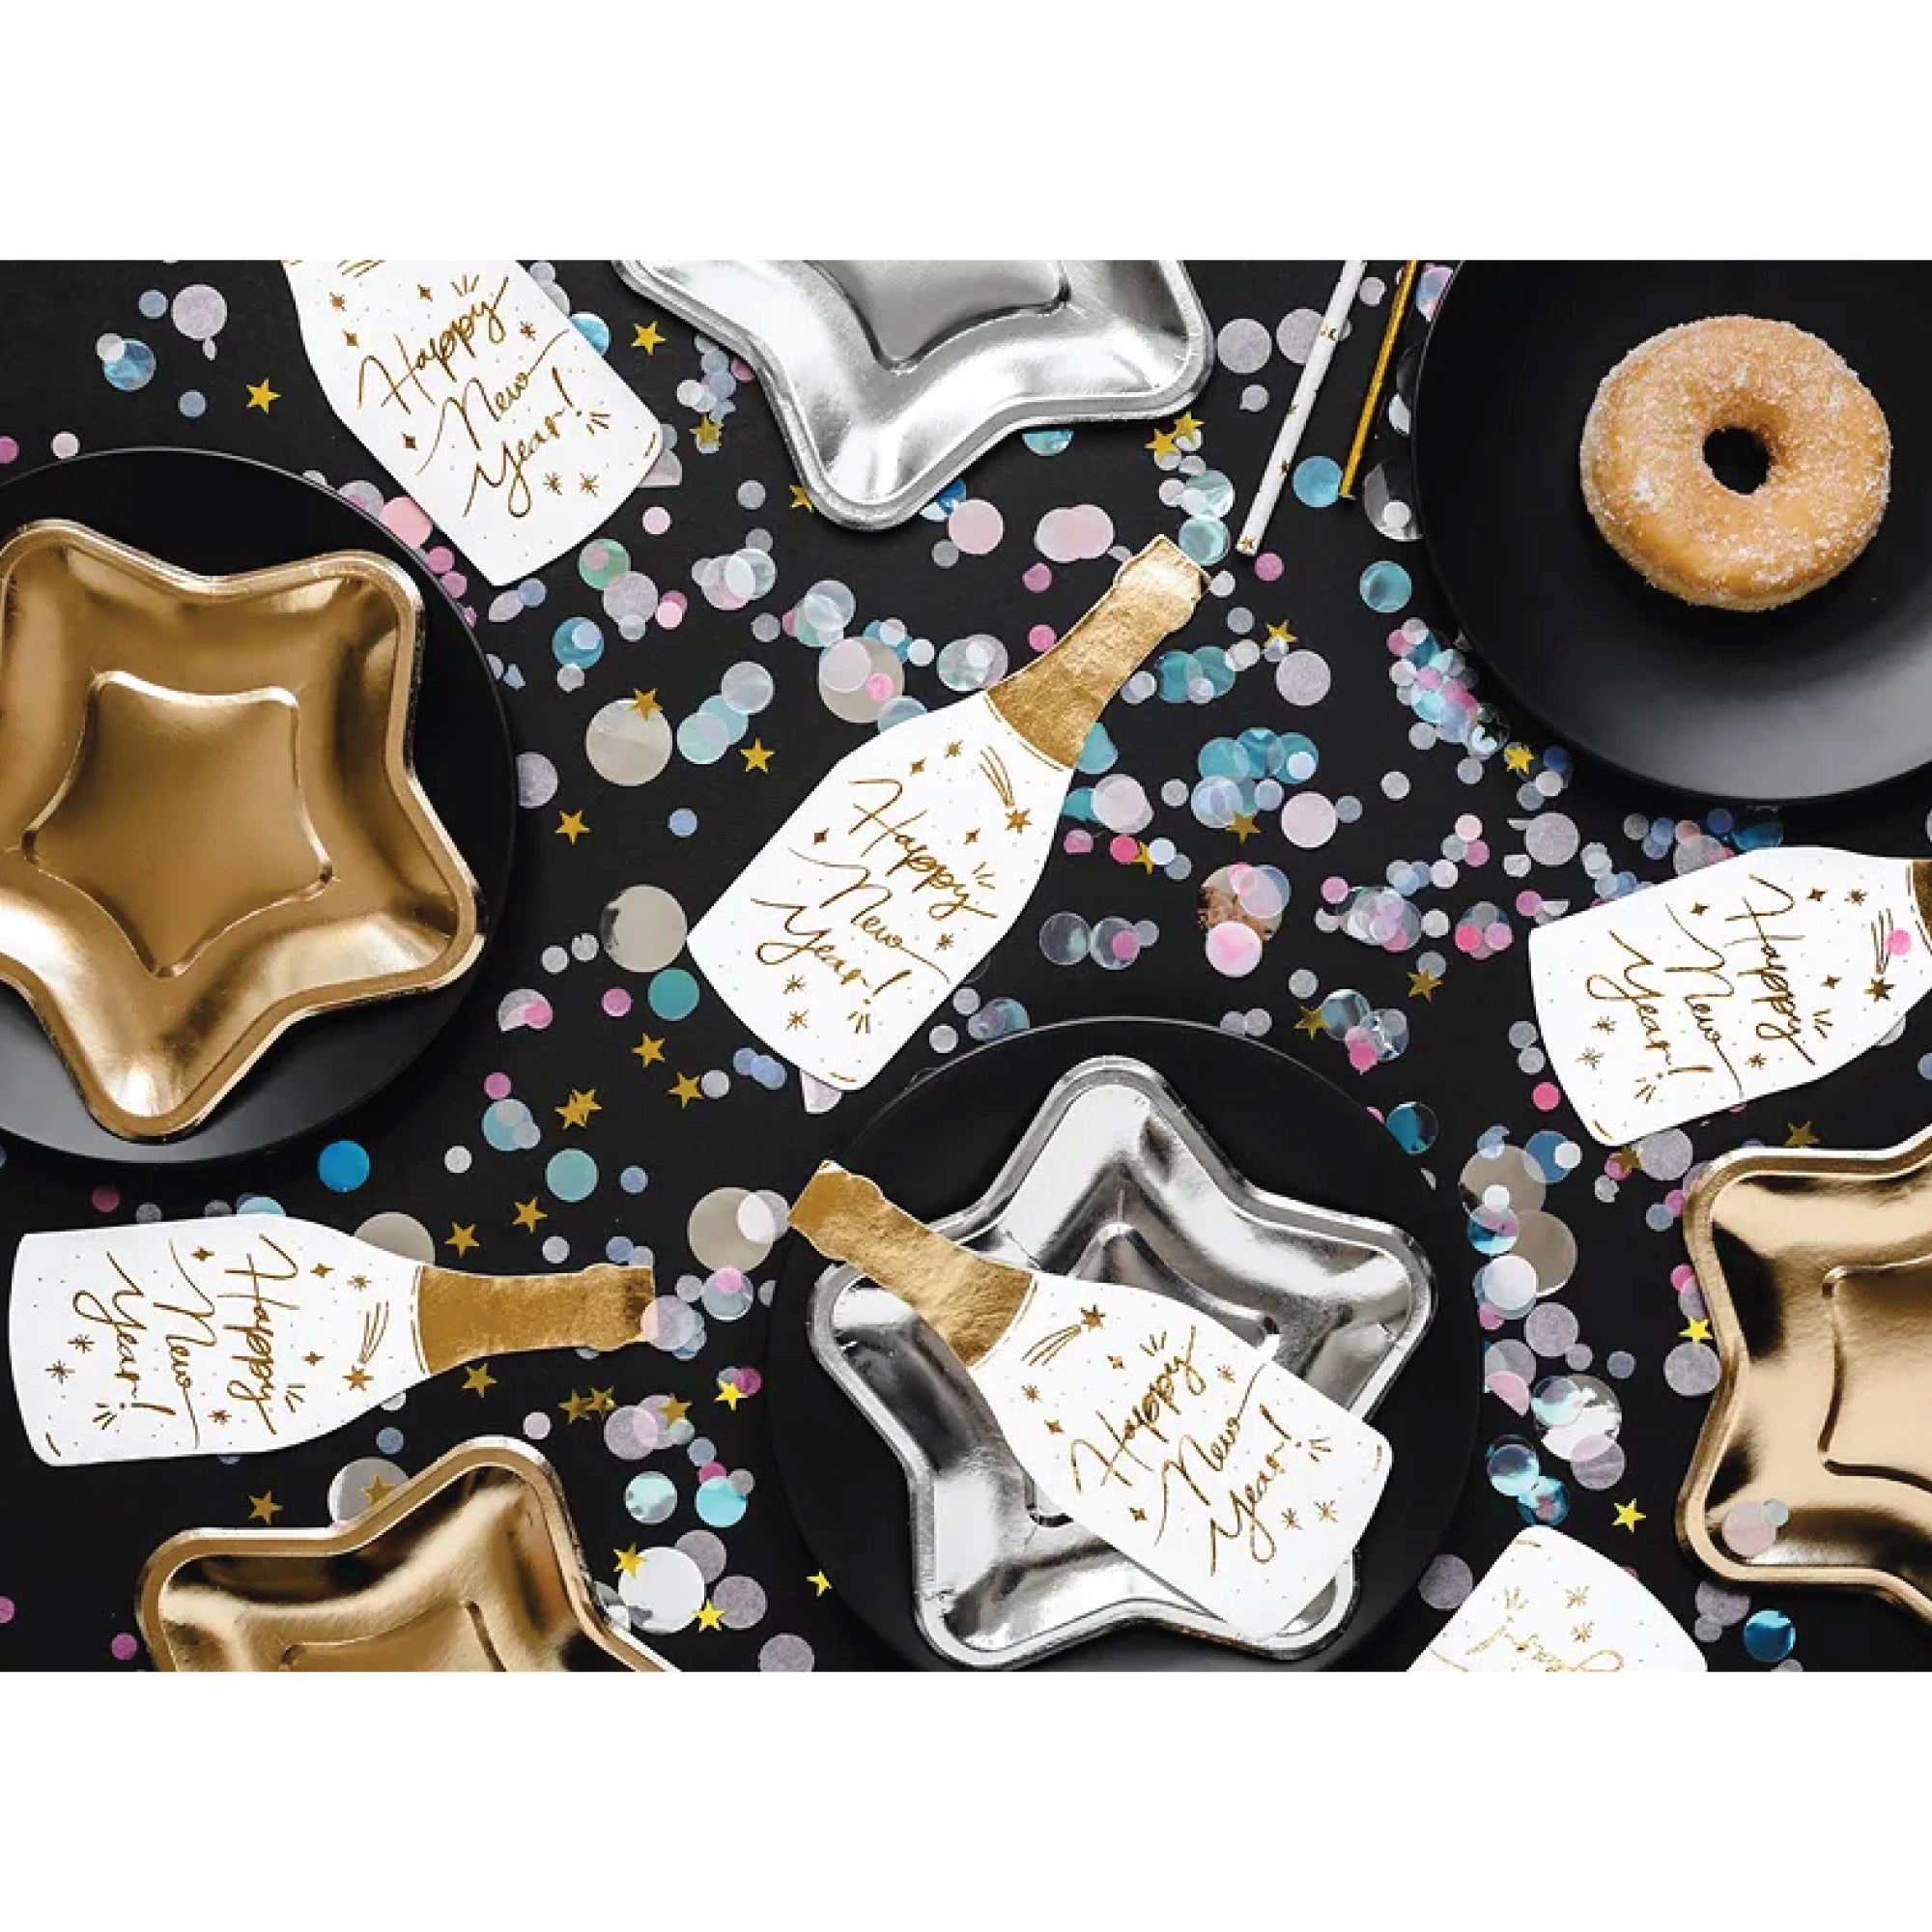 Happy New Year Champagne Bottle Dessert Napkins 20ct | The Party Darling